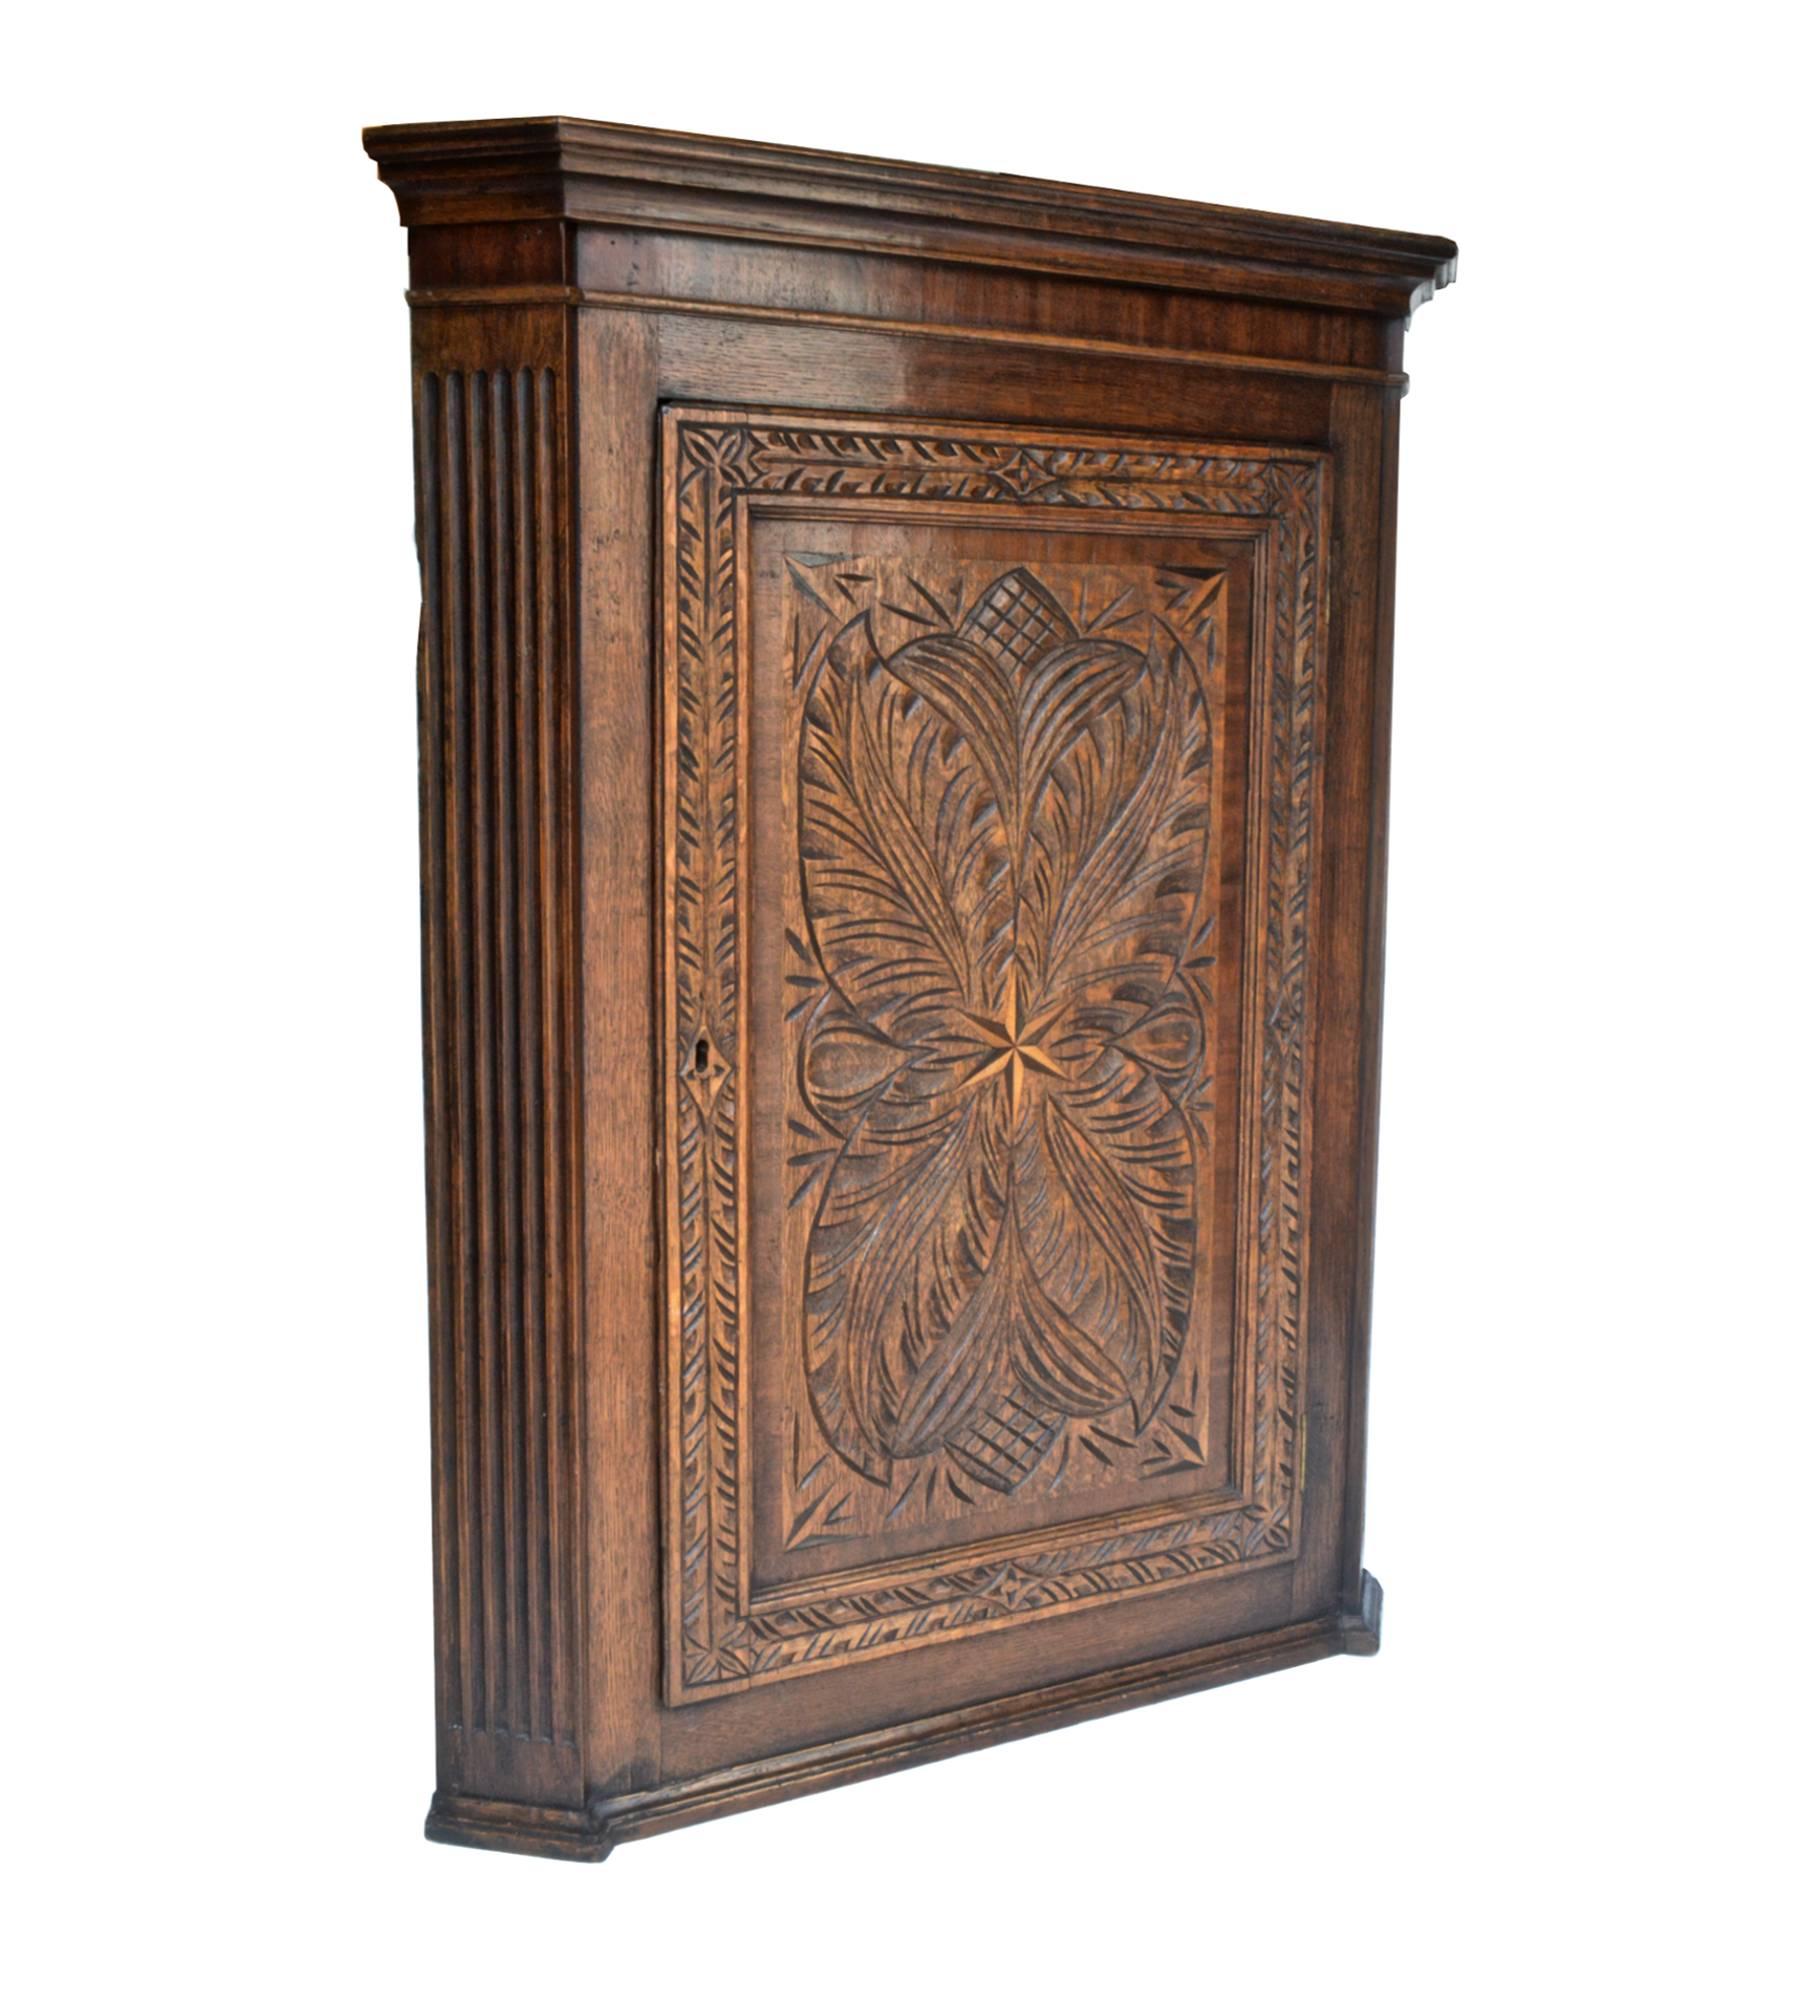 19th century corner cabinet of oak. The hanging cupboard has a glorious hand-carved blind and hinged swinging door that opens to reveal three ample shelves of sound storage. The rich and natural patina of the cabinet will warm up any room in which